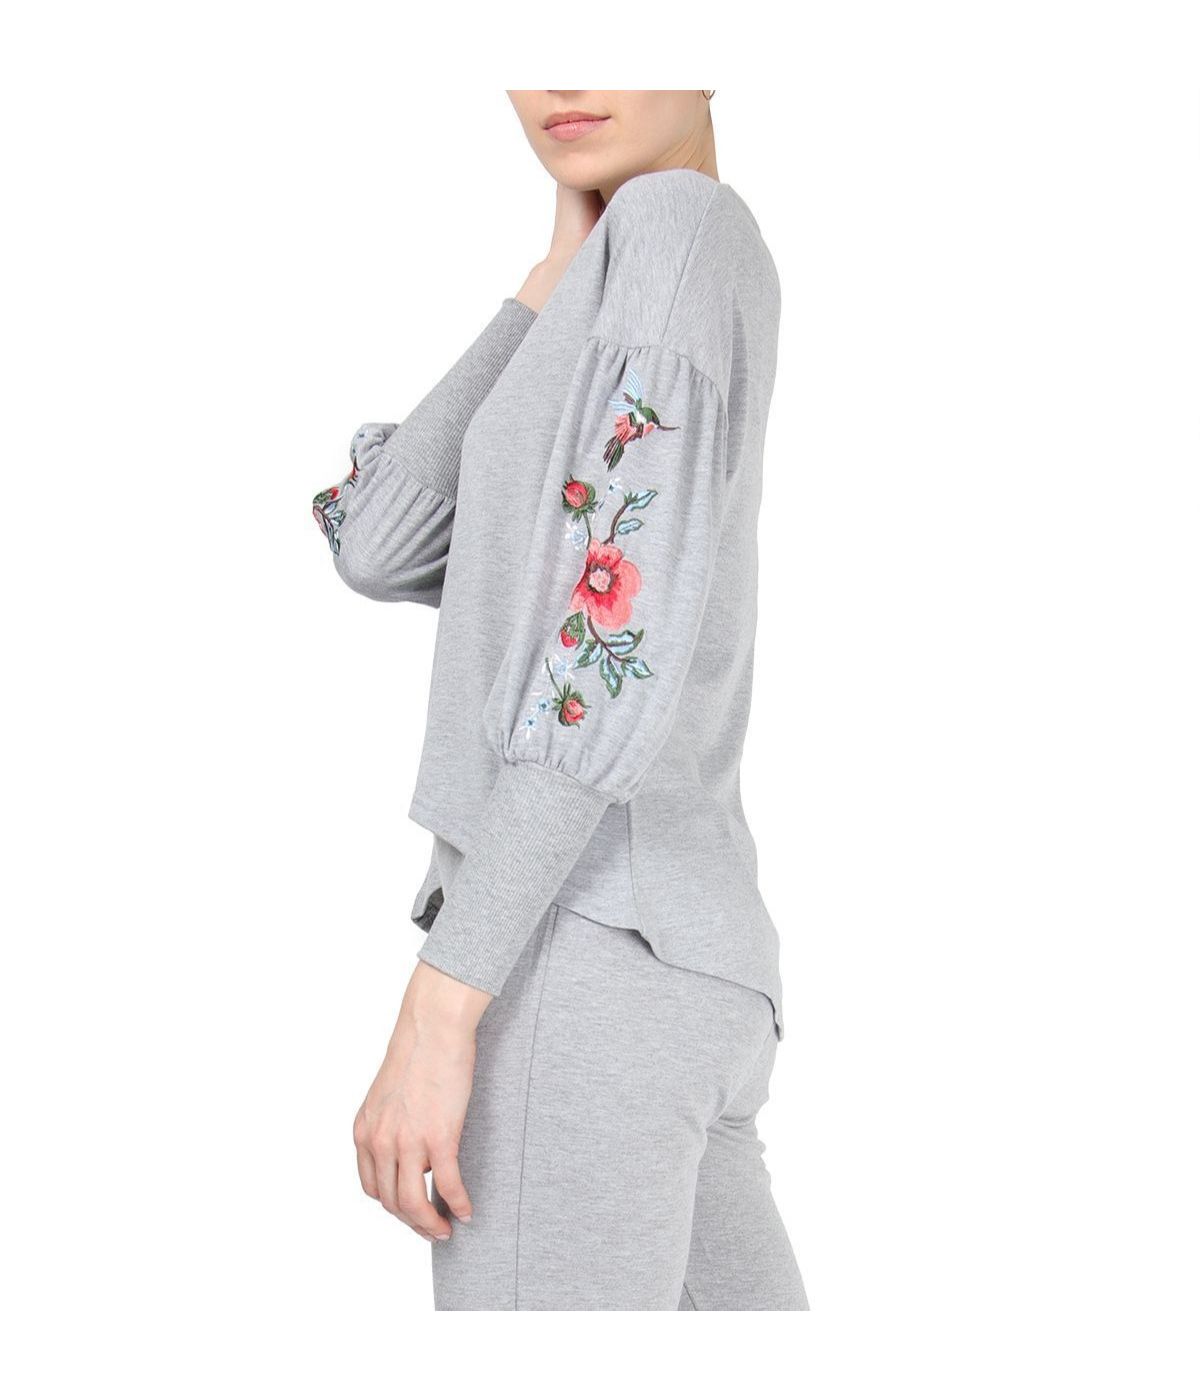 Women's Oversized Dropped Sleeve Top with Ribbed Cuff and Embroidery Gray Heather